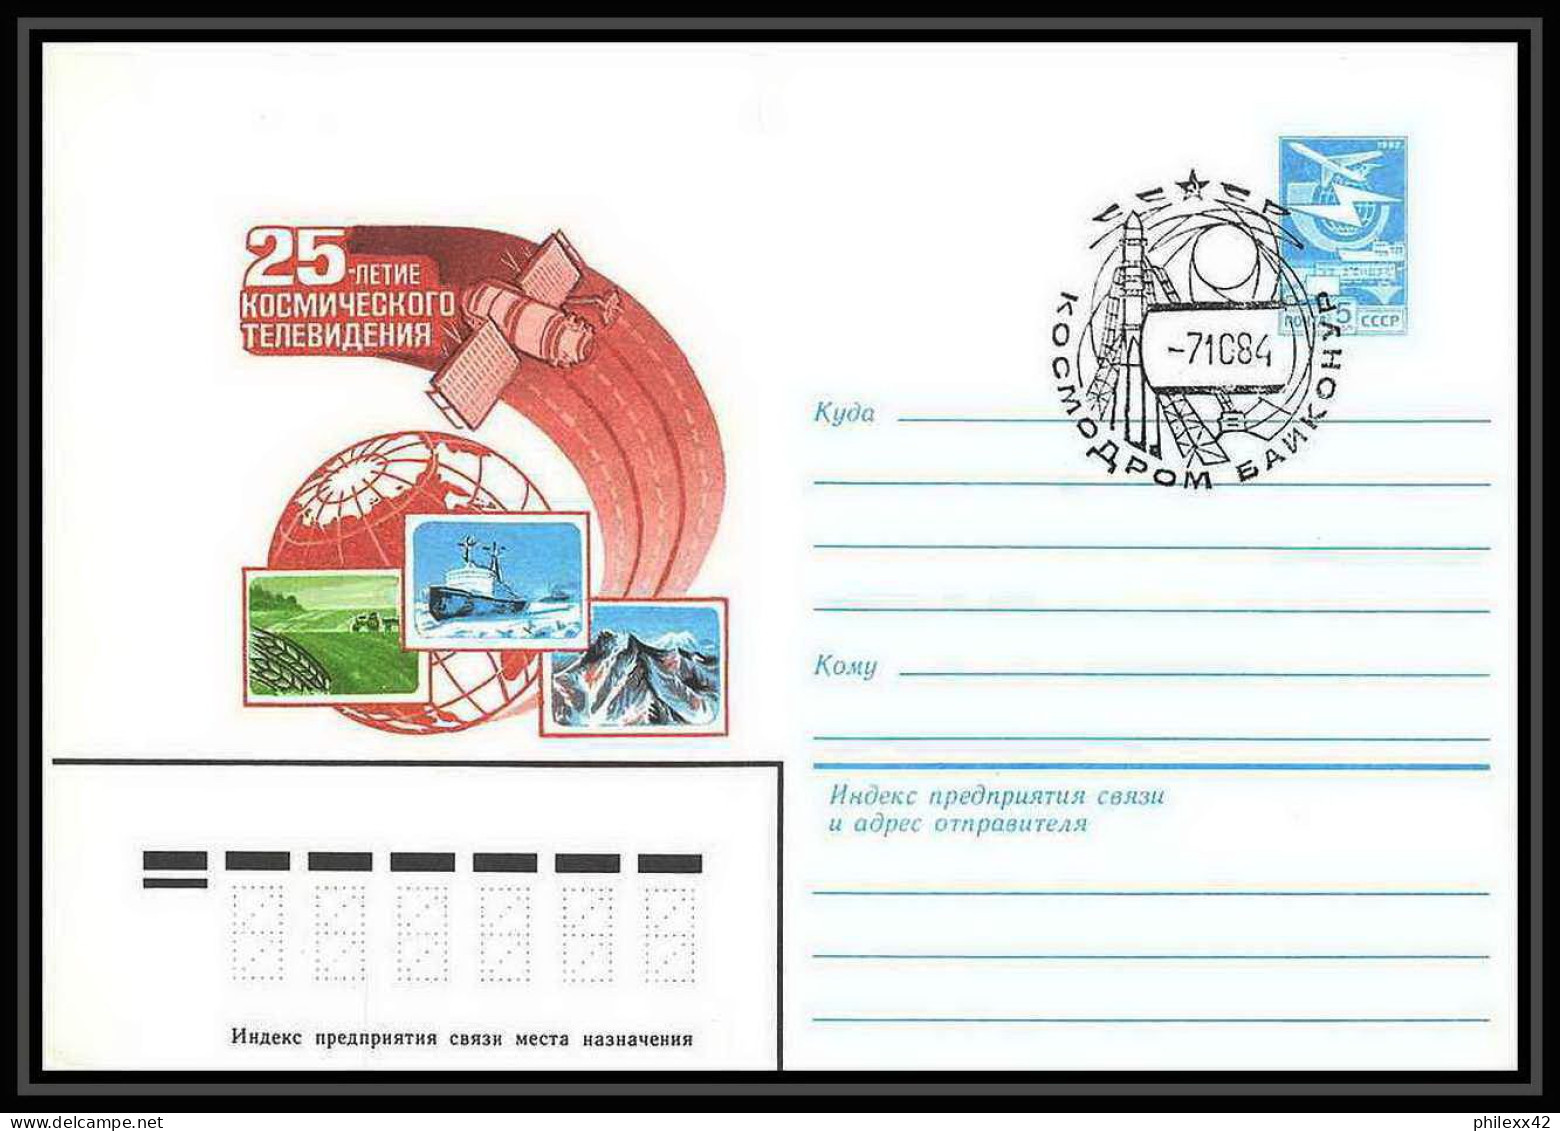 9154/ Espace (space Raumfahrt) Entier Postal (Stamped Stationery) 7/10/1984 (Russia Urss USSR) - Rusia & URSS